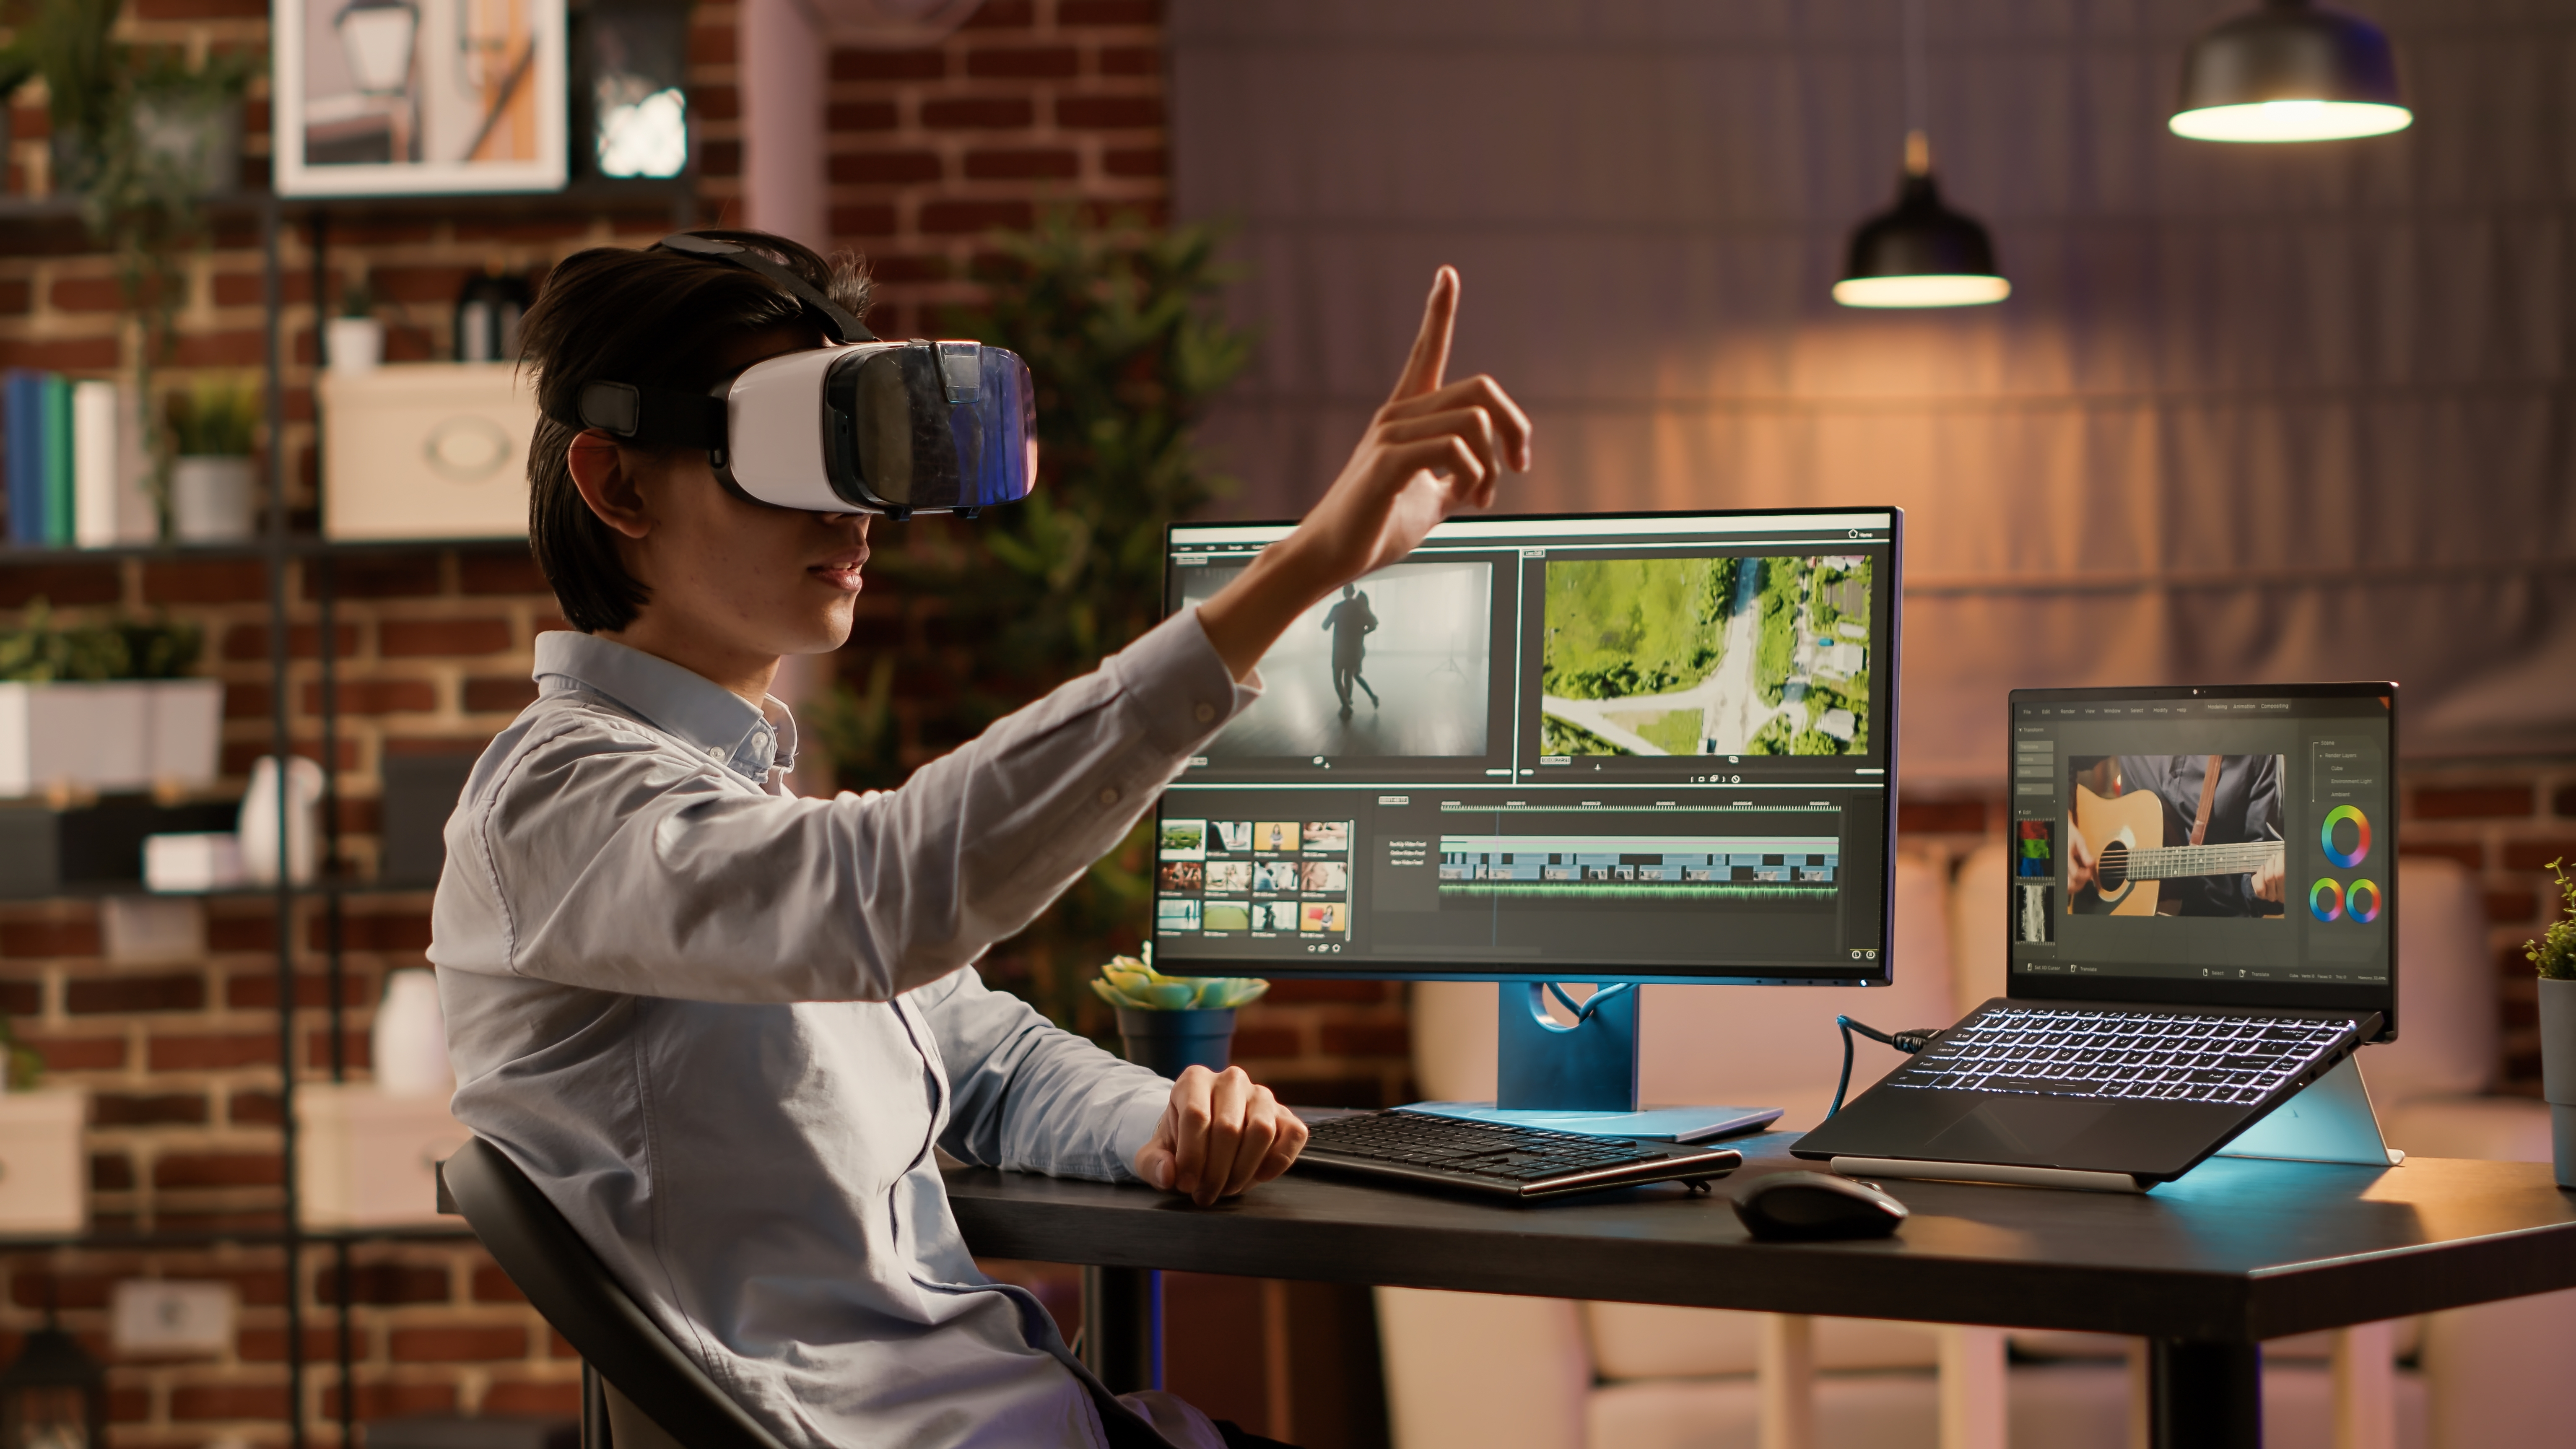 A woman with a VR headset on in front of a suite of video editing software